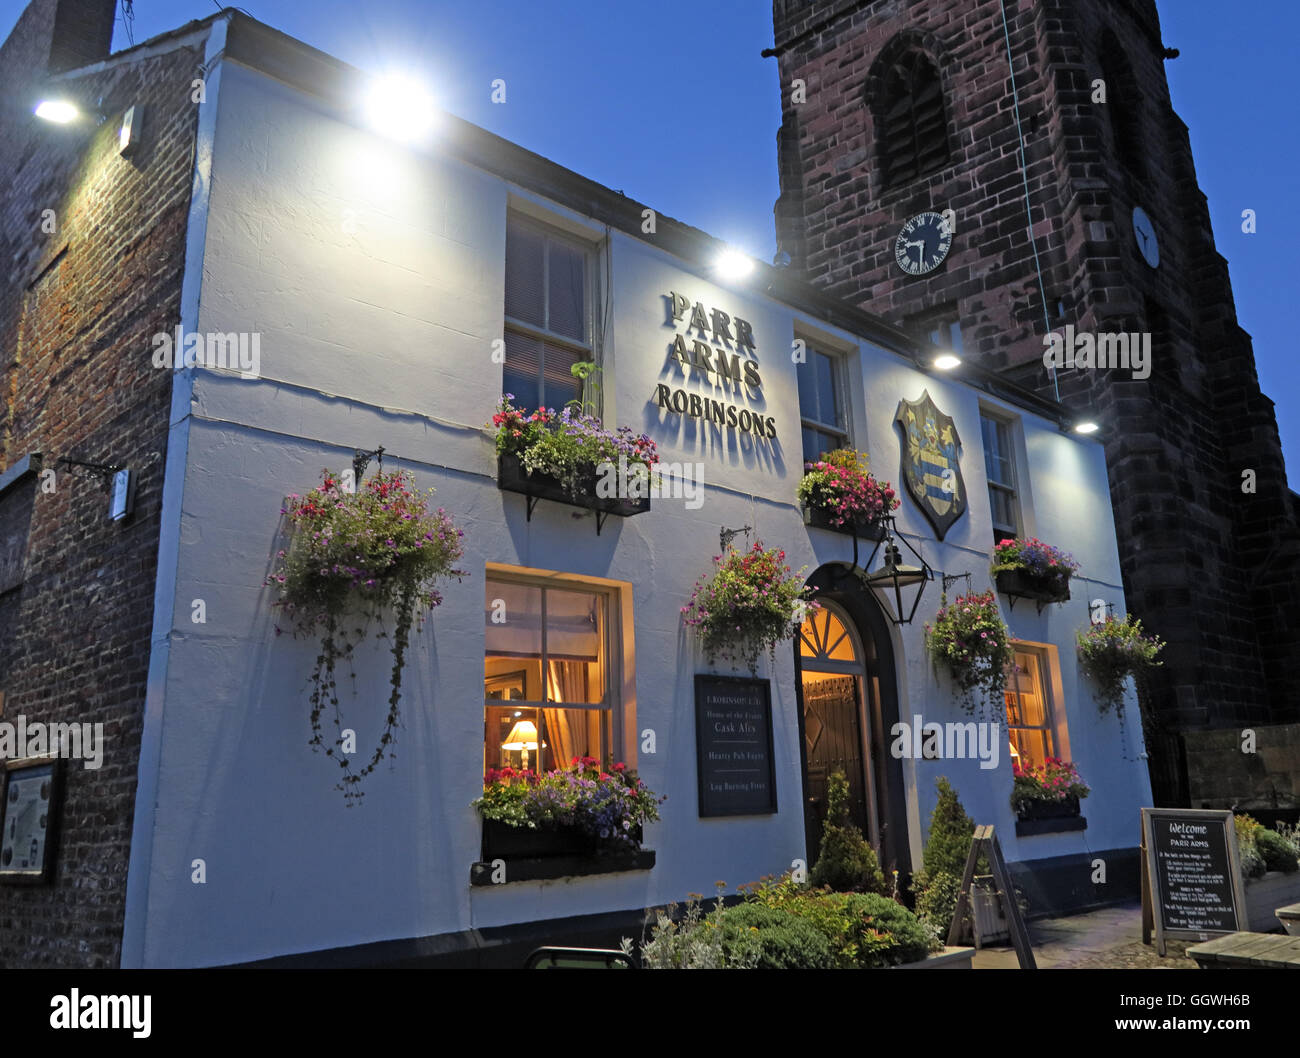 Parr Arms Pub,Grappenhall Warrington,Village,Cheshire, Angleterre, UK at night Banque D'Images